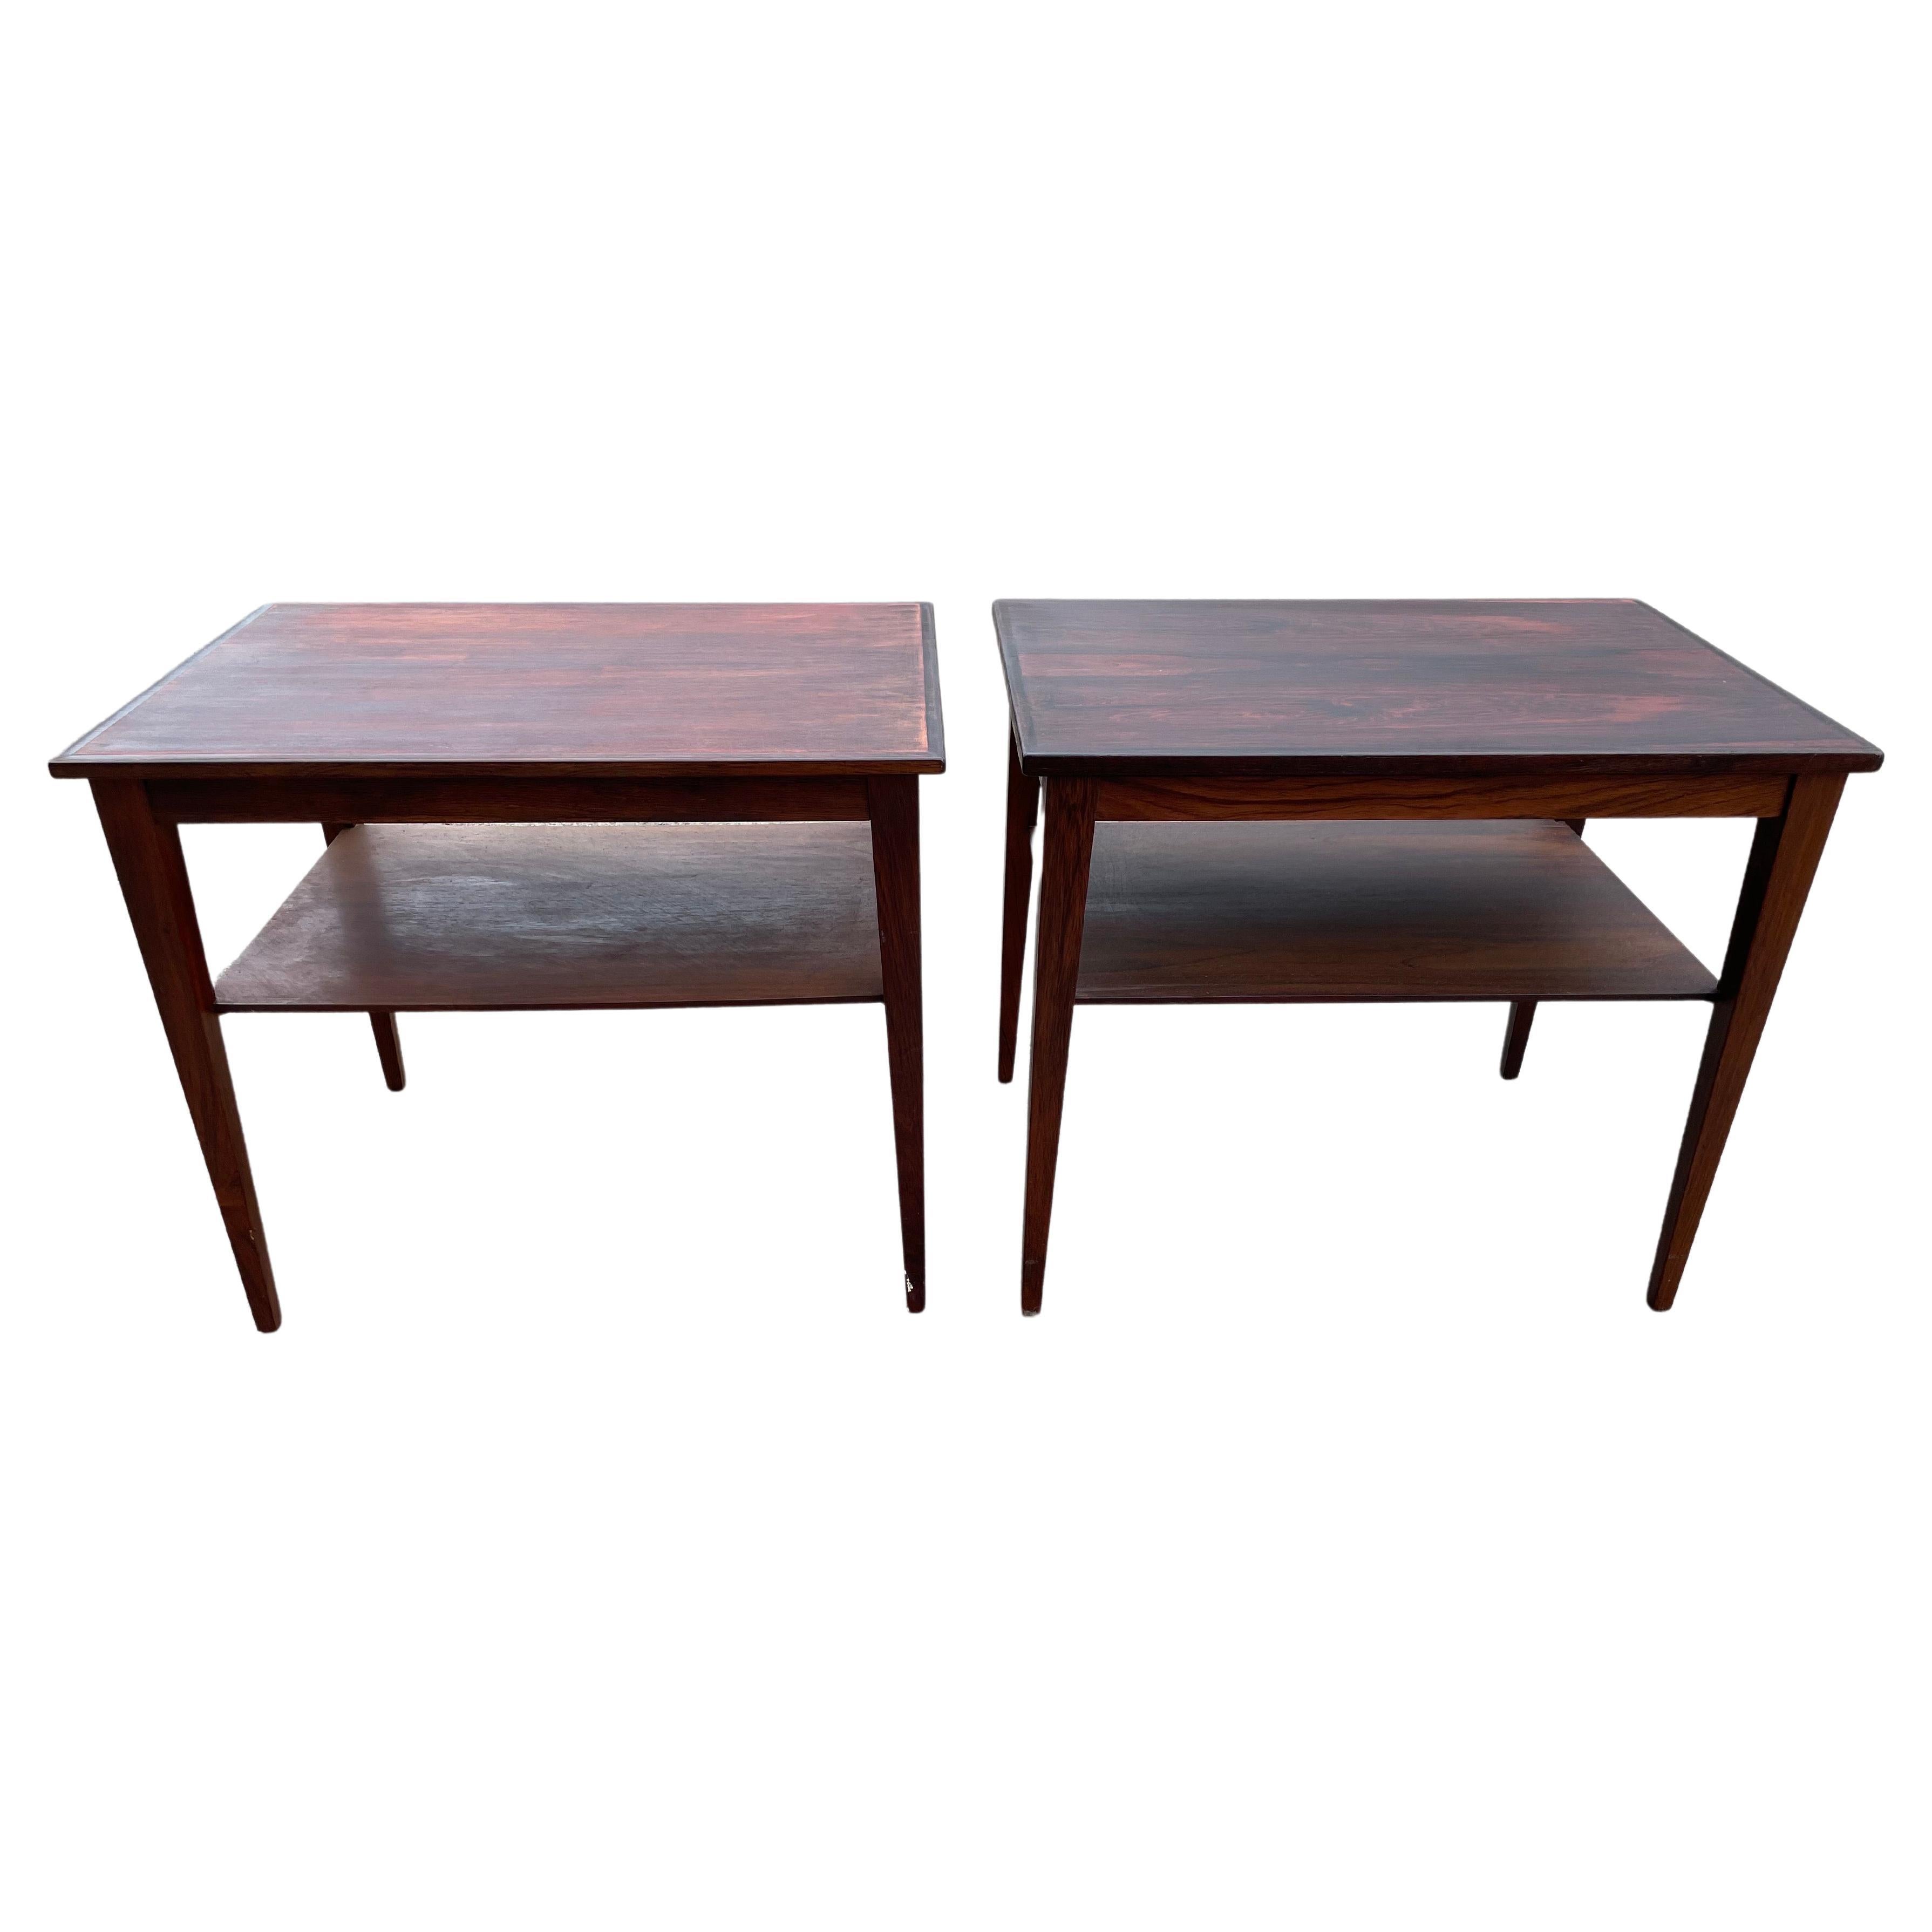 A pair of exquisite rosewood side tables from the 1960s. These versatile pieces effortlessly combine style and functionality, making them ideal as nightstands or standalone accent tables. Crafted with meticulous attention to detail, the rich